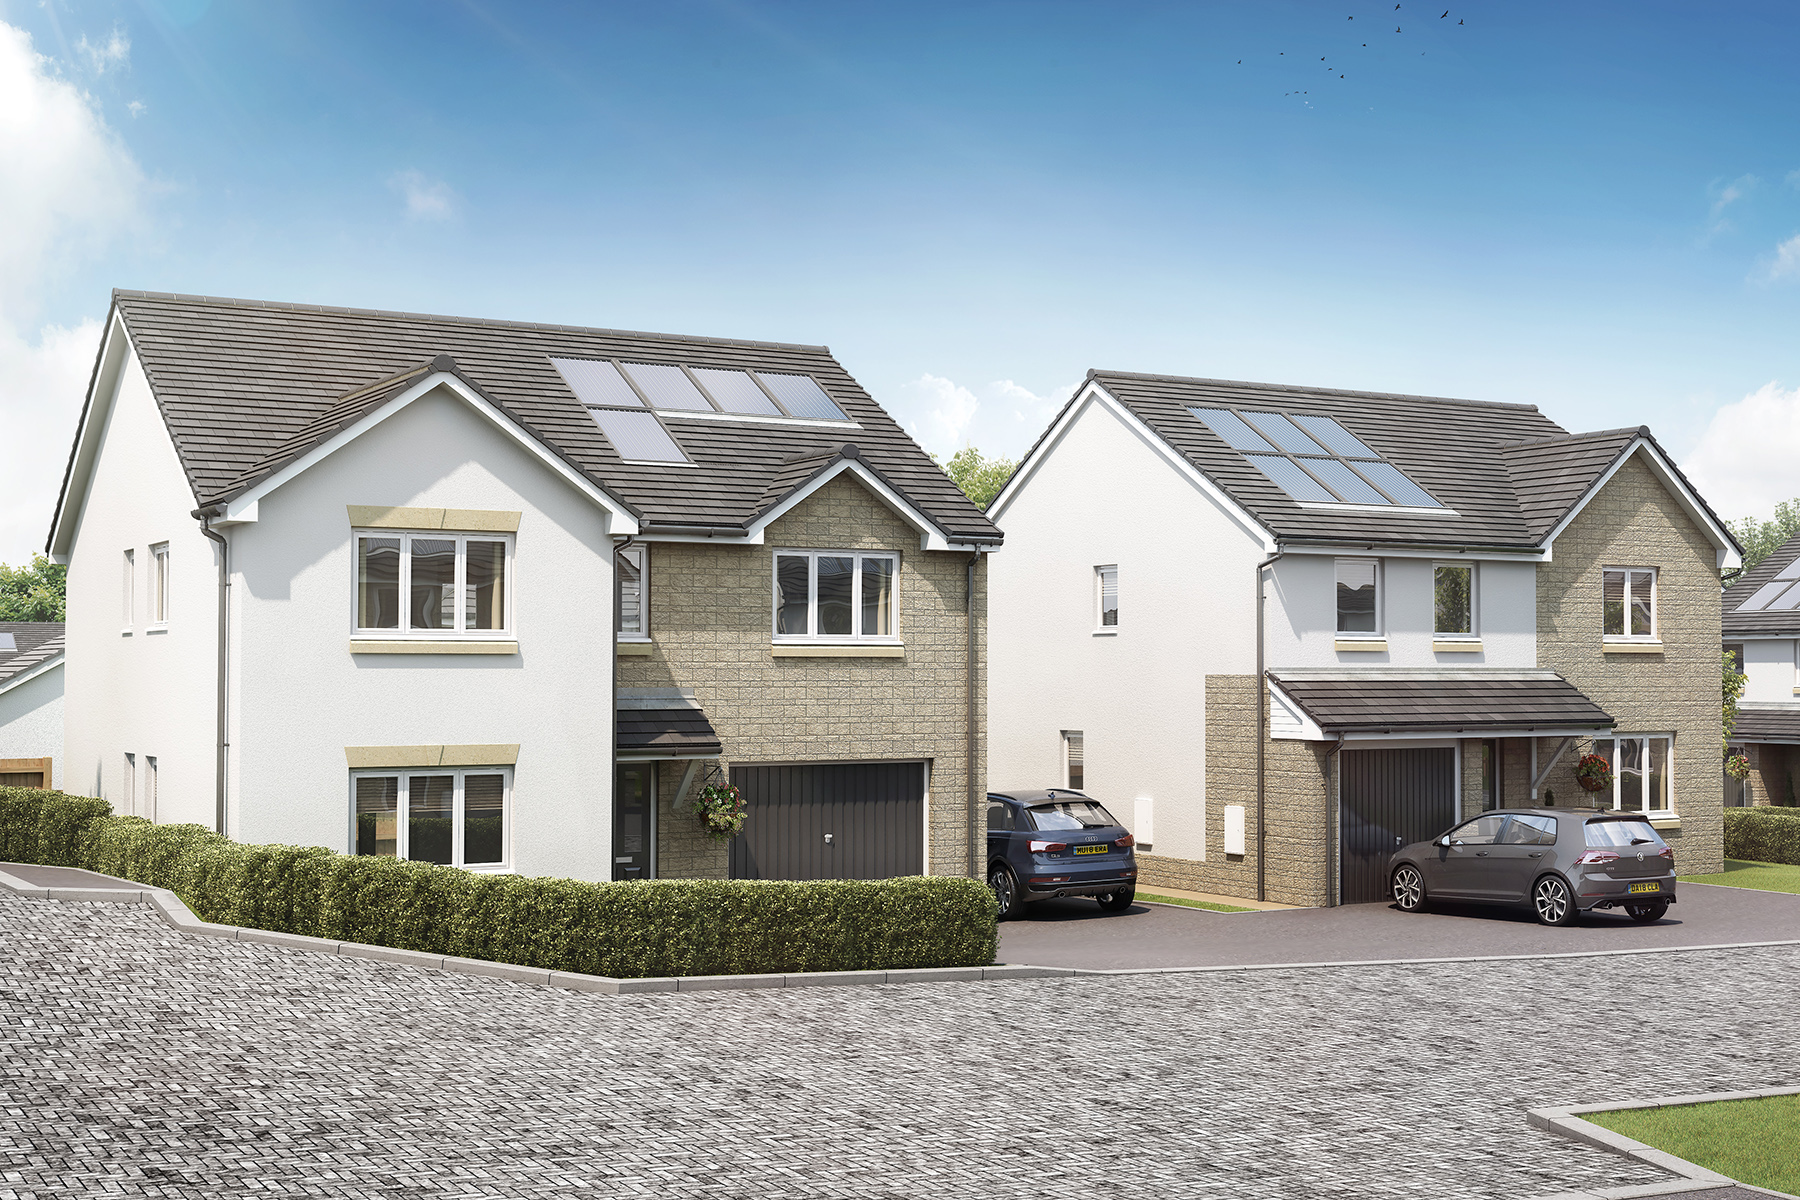 Pre-construction work commences at Taylor Wimpey’s first development in Kilwinning